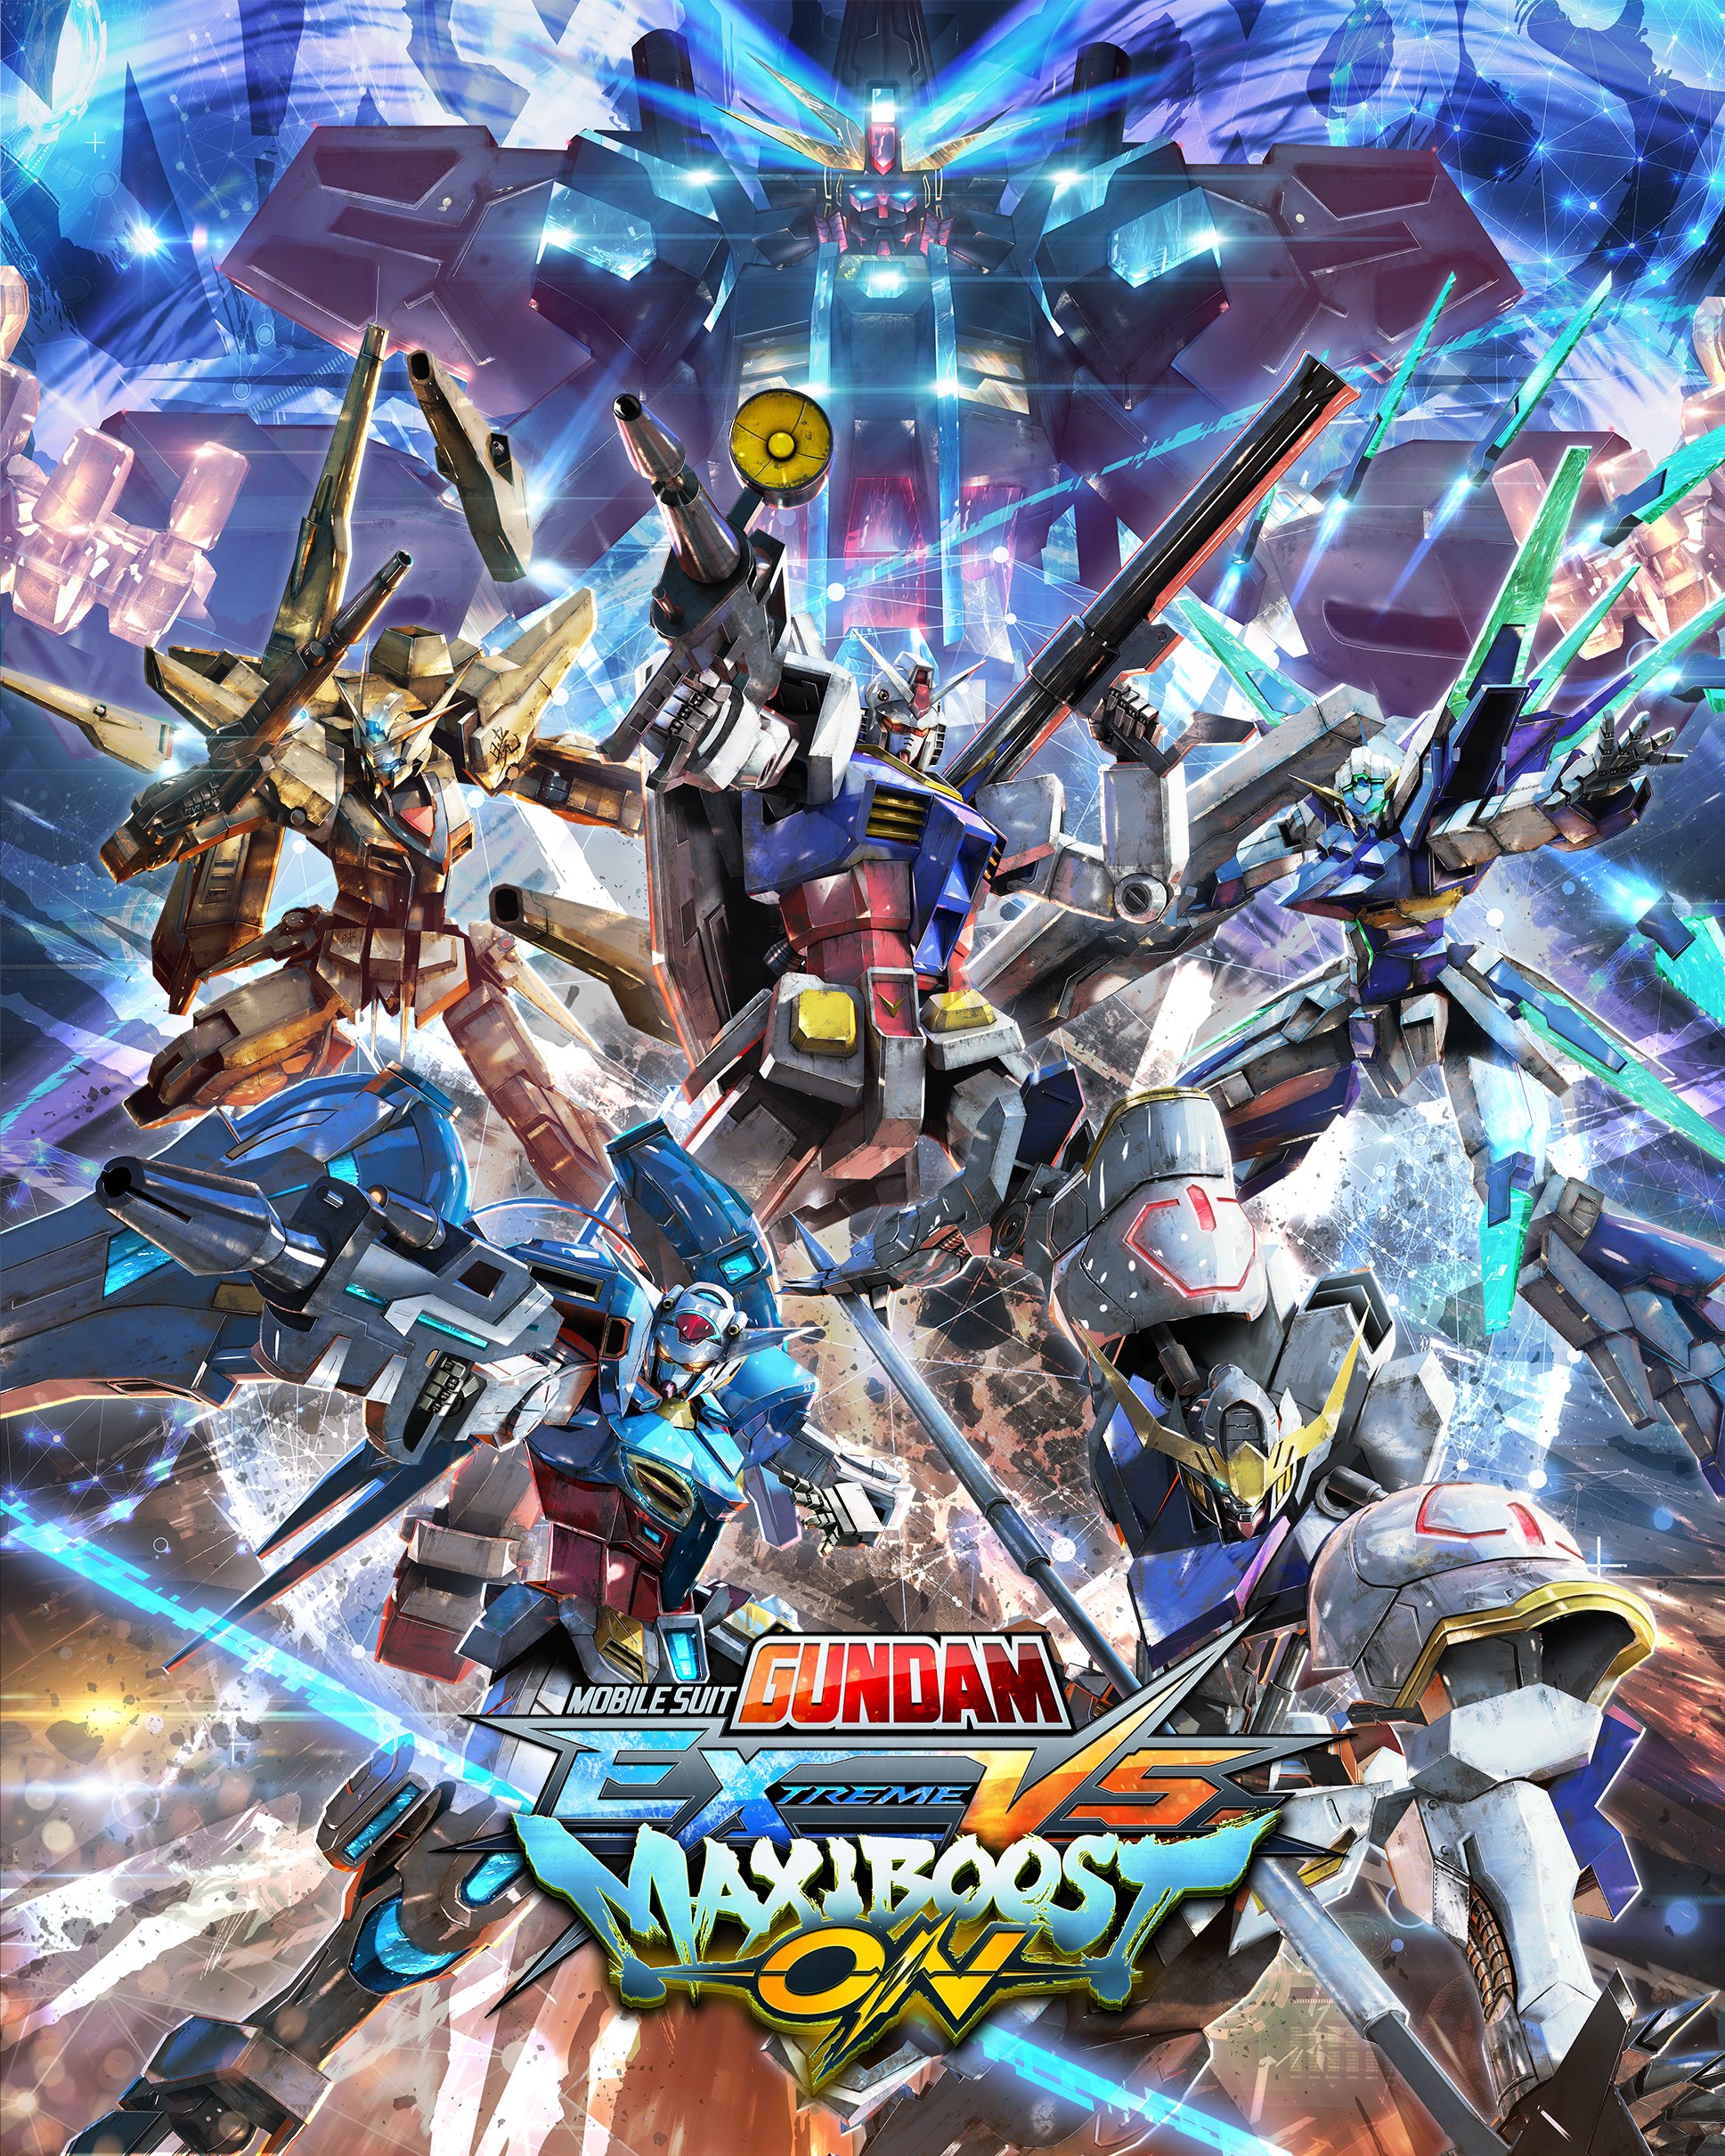 Bandai Namco US on X: MOBILE SUIT #GUNDAM EXTREME VS. MAXIBOOST ON is now  on PS5! PS4 users, please transfer your save data before launching the  game, you may incur unintentional penalties